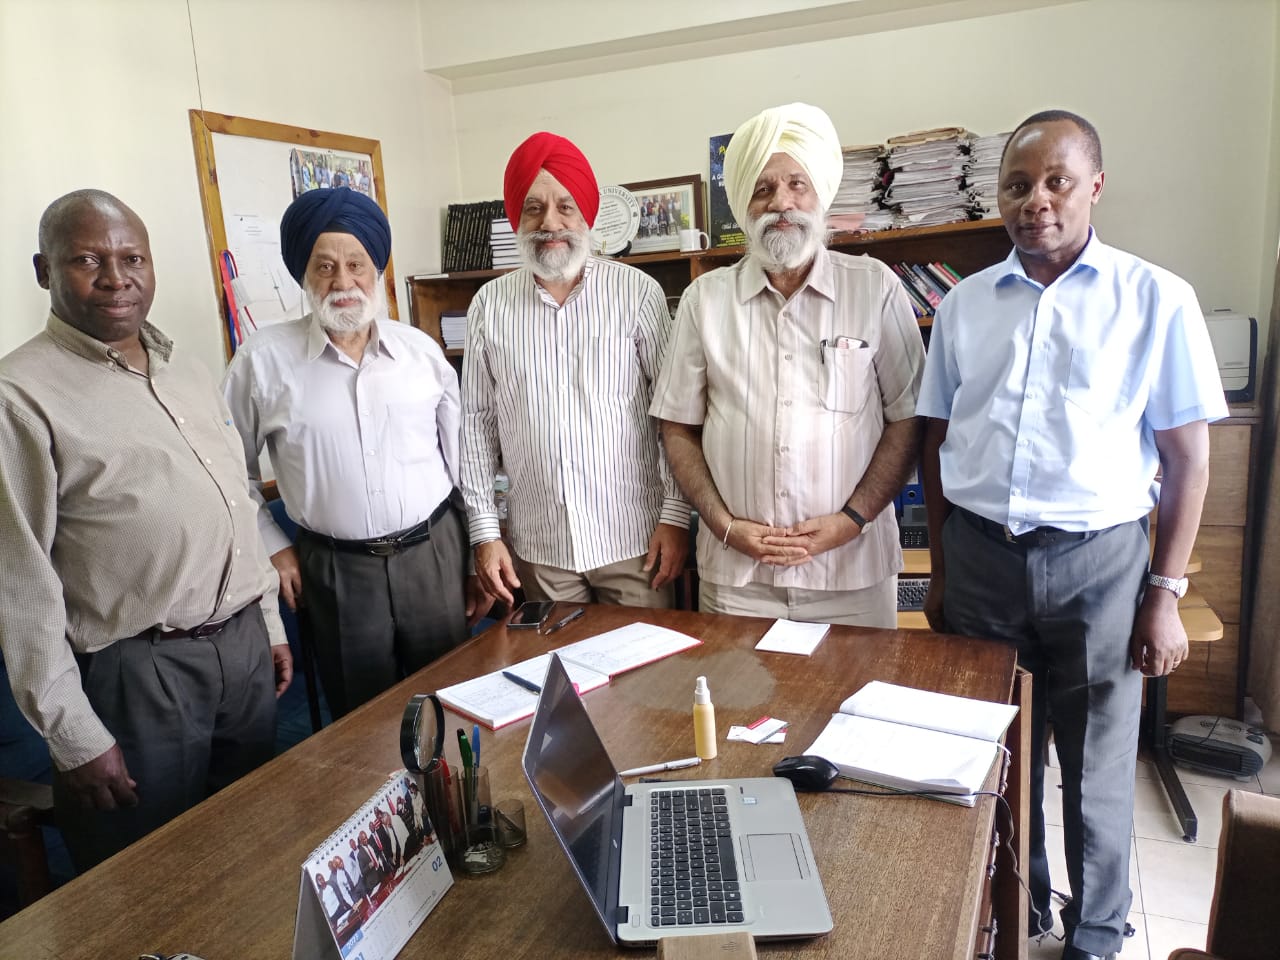 Dr. Gurcharan Singh, adjunct research professor in the Faculty of Arts and Social Sciences at Carleton University paid a courtesy call on the Chair of the Department of Philosophy, Prof. Karori Mbugua. Amongst other things, they discussed possible collaboration between Carleton University and the University of Nairobi, especially in the area of Sikh Studies.